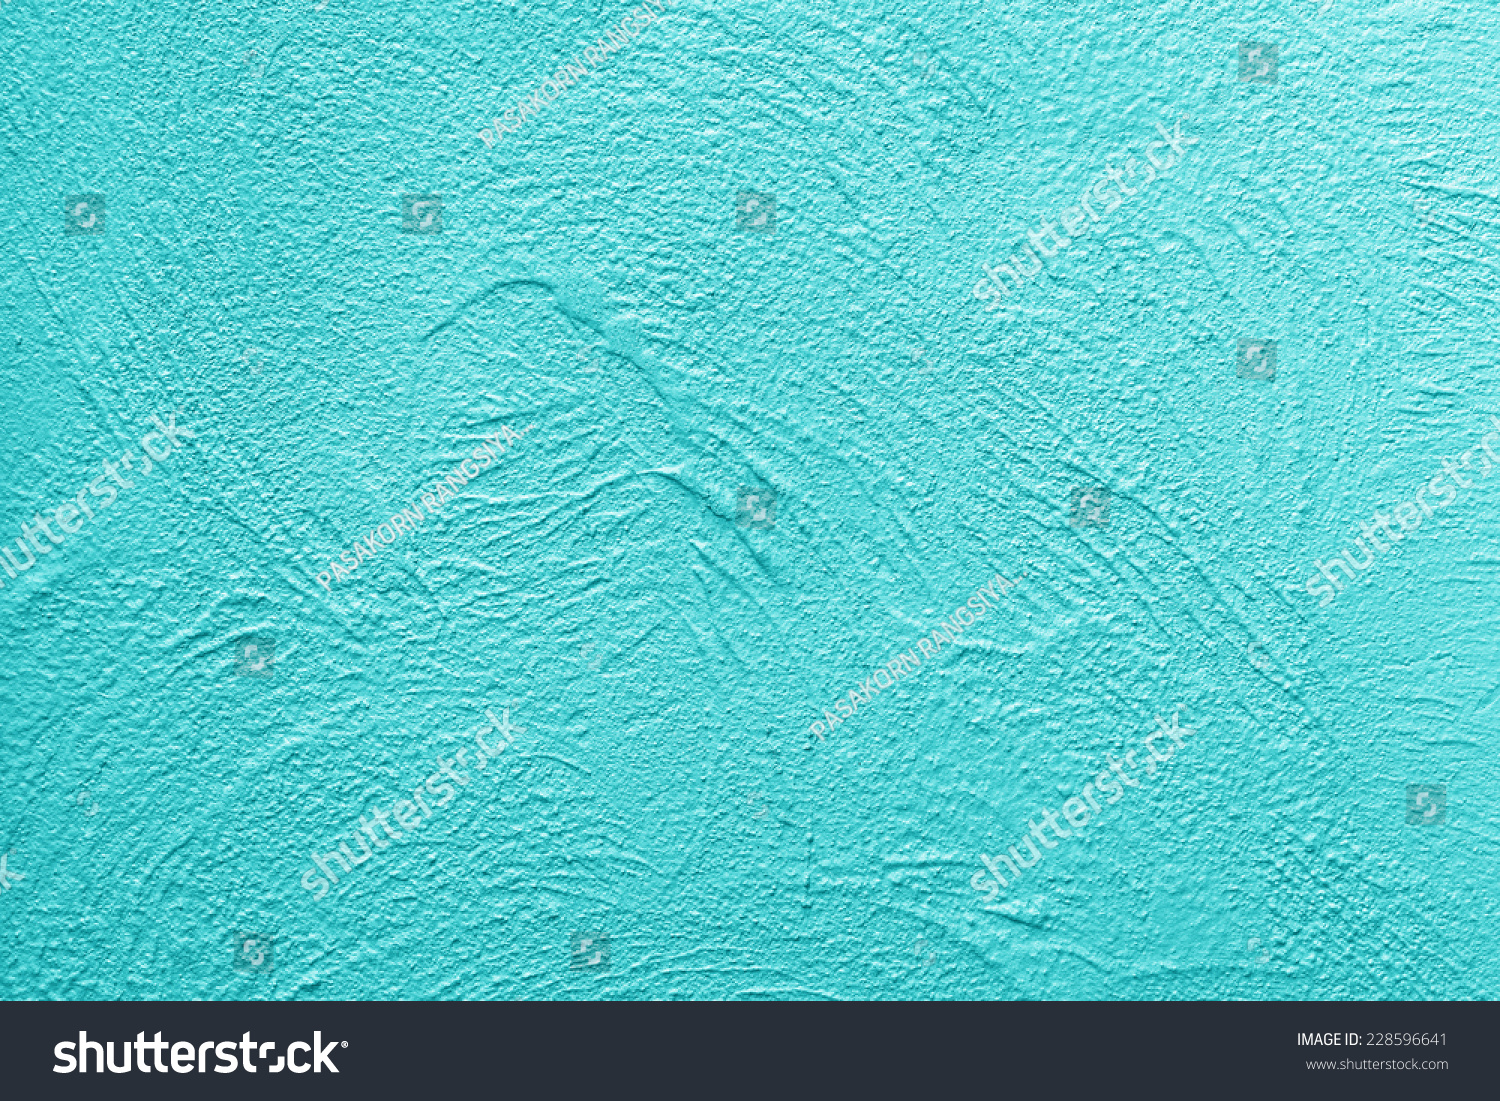 Wall Cement Backgrounds & Textures #228596641